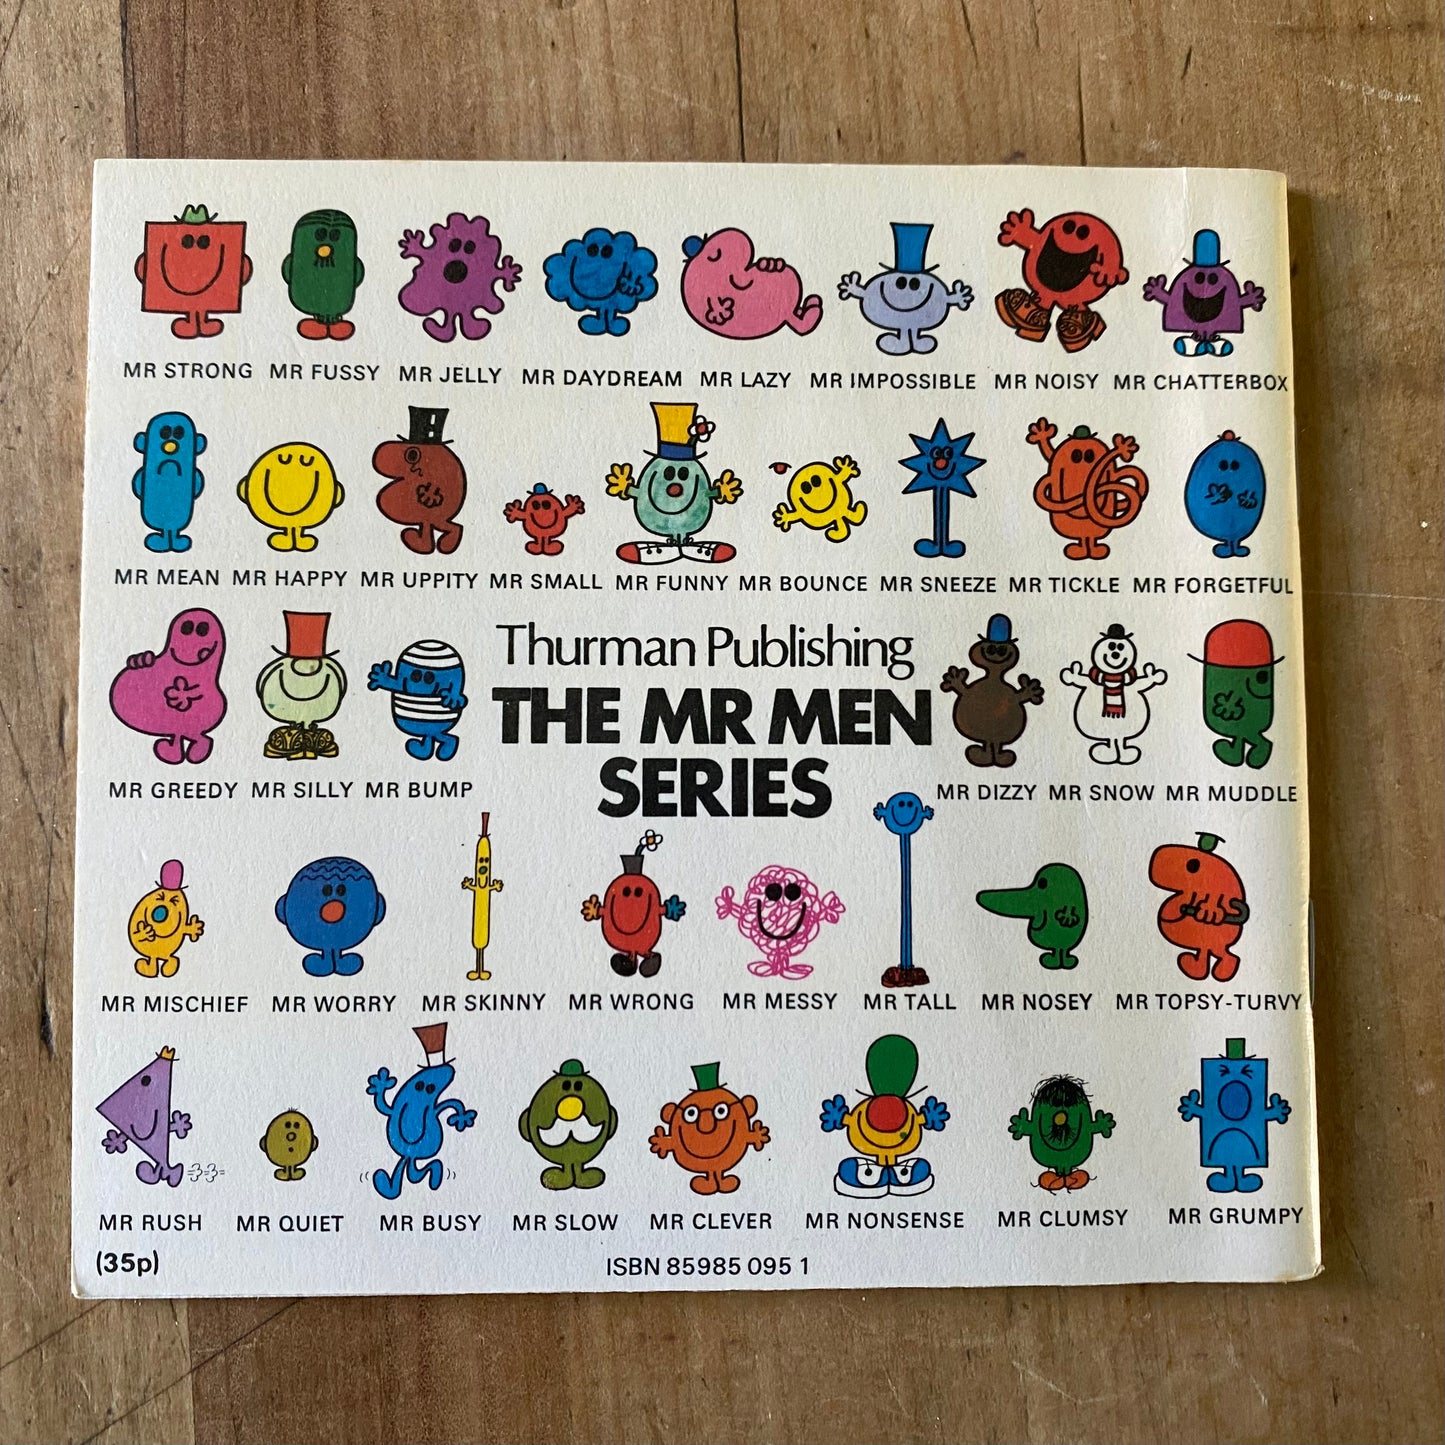 Mr. Clumsy by Roger Hargreaves. Original 1970s The Mr Men series. 1978  edition.Great gift idea